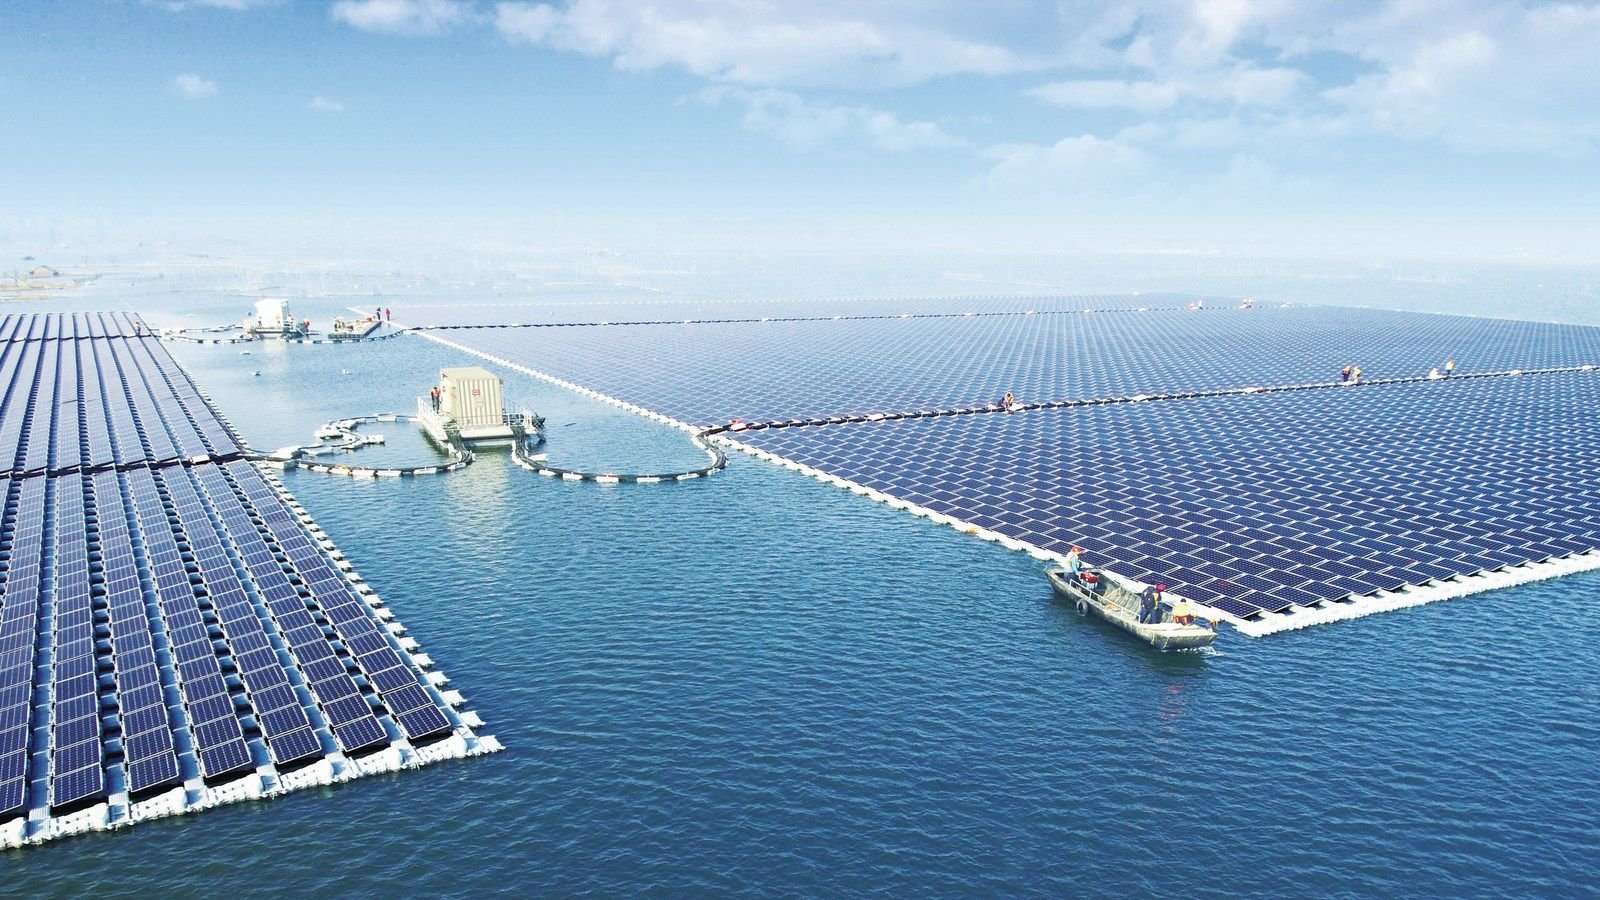 image for The world’s largest floating solar farm is producing energy atop a former coal mine